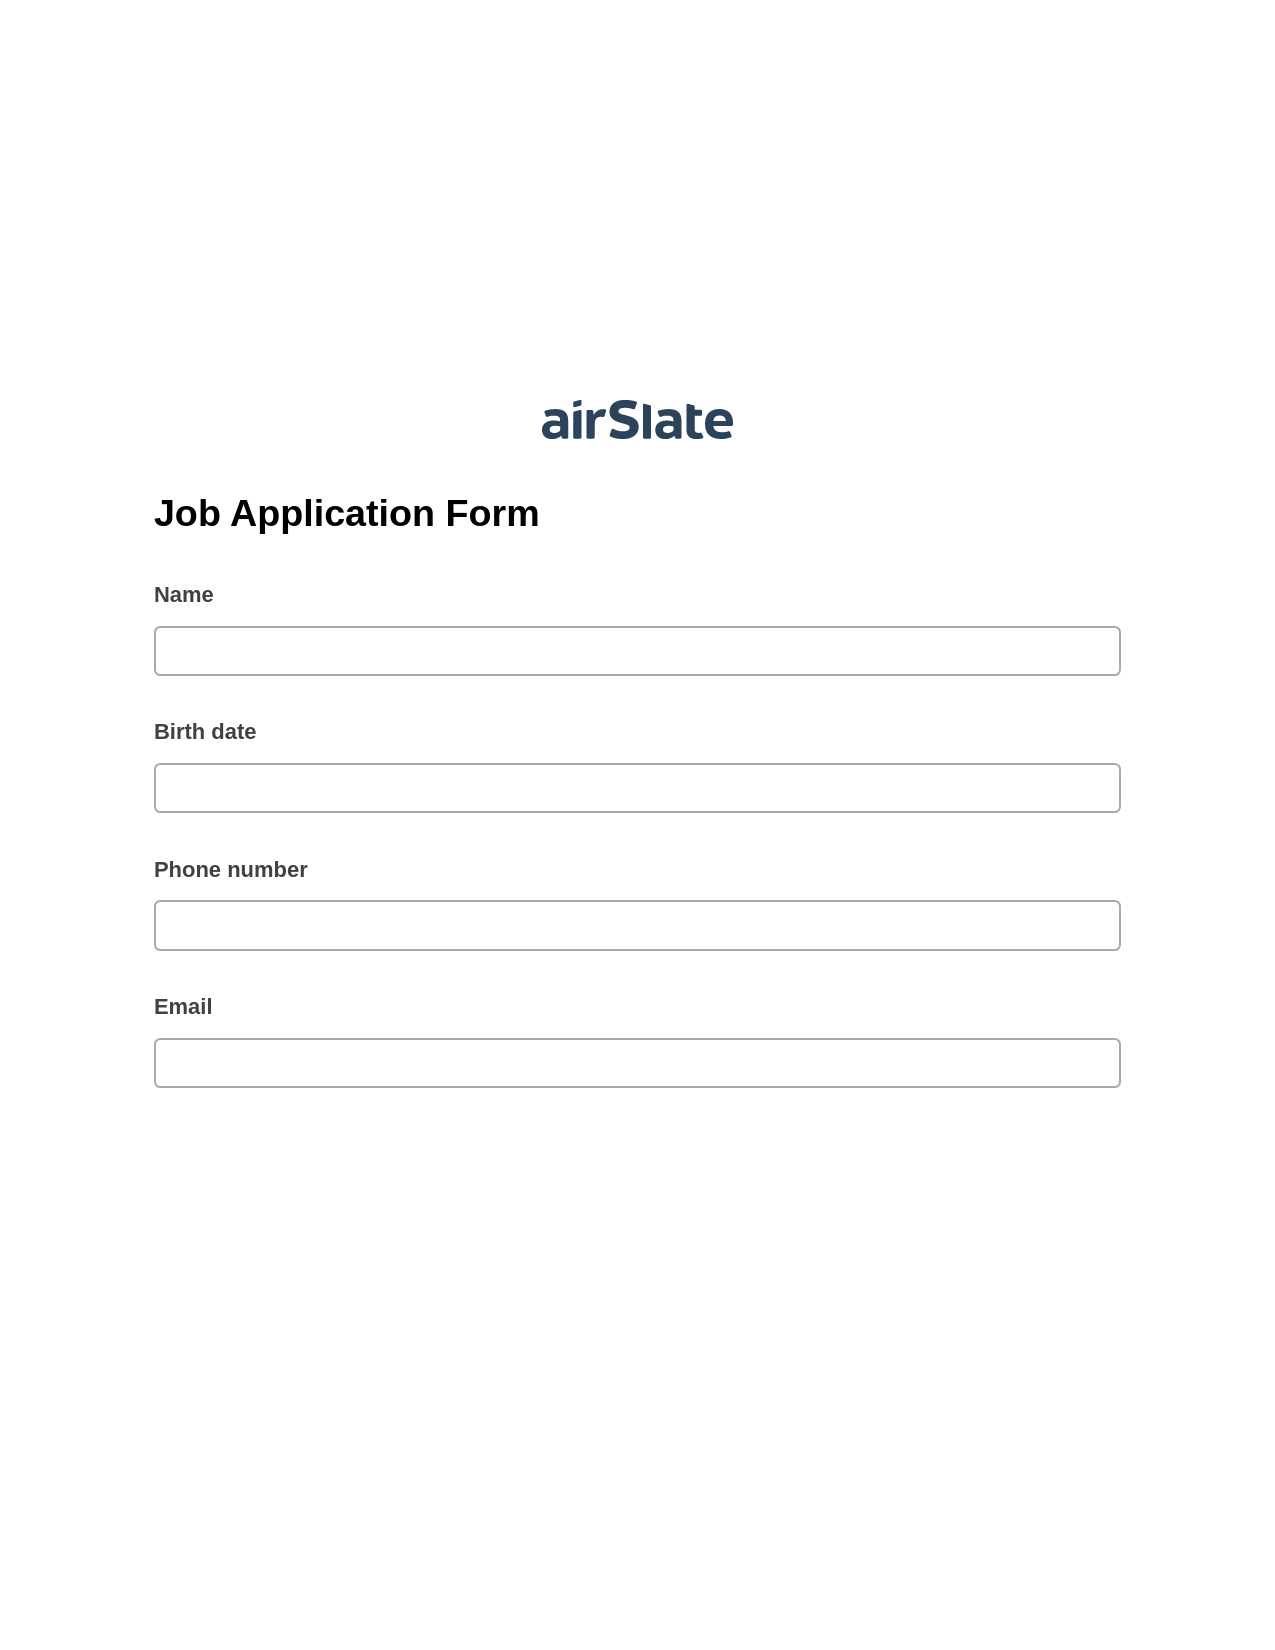 Job Application Form Pre-fill from another Slate Bot, Create NetSuite Records Bot, Dropbox Bot